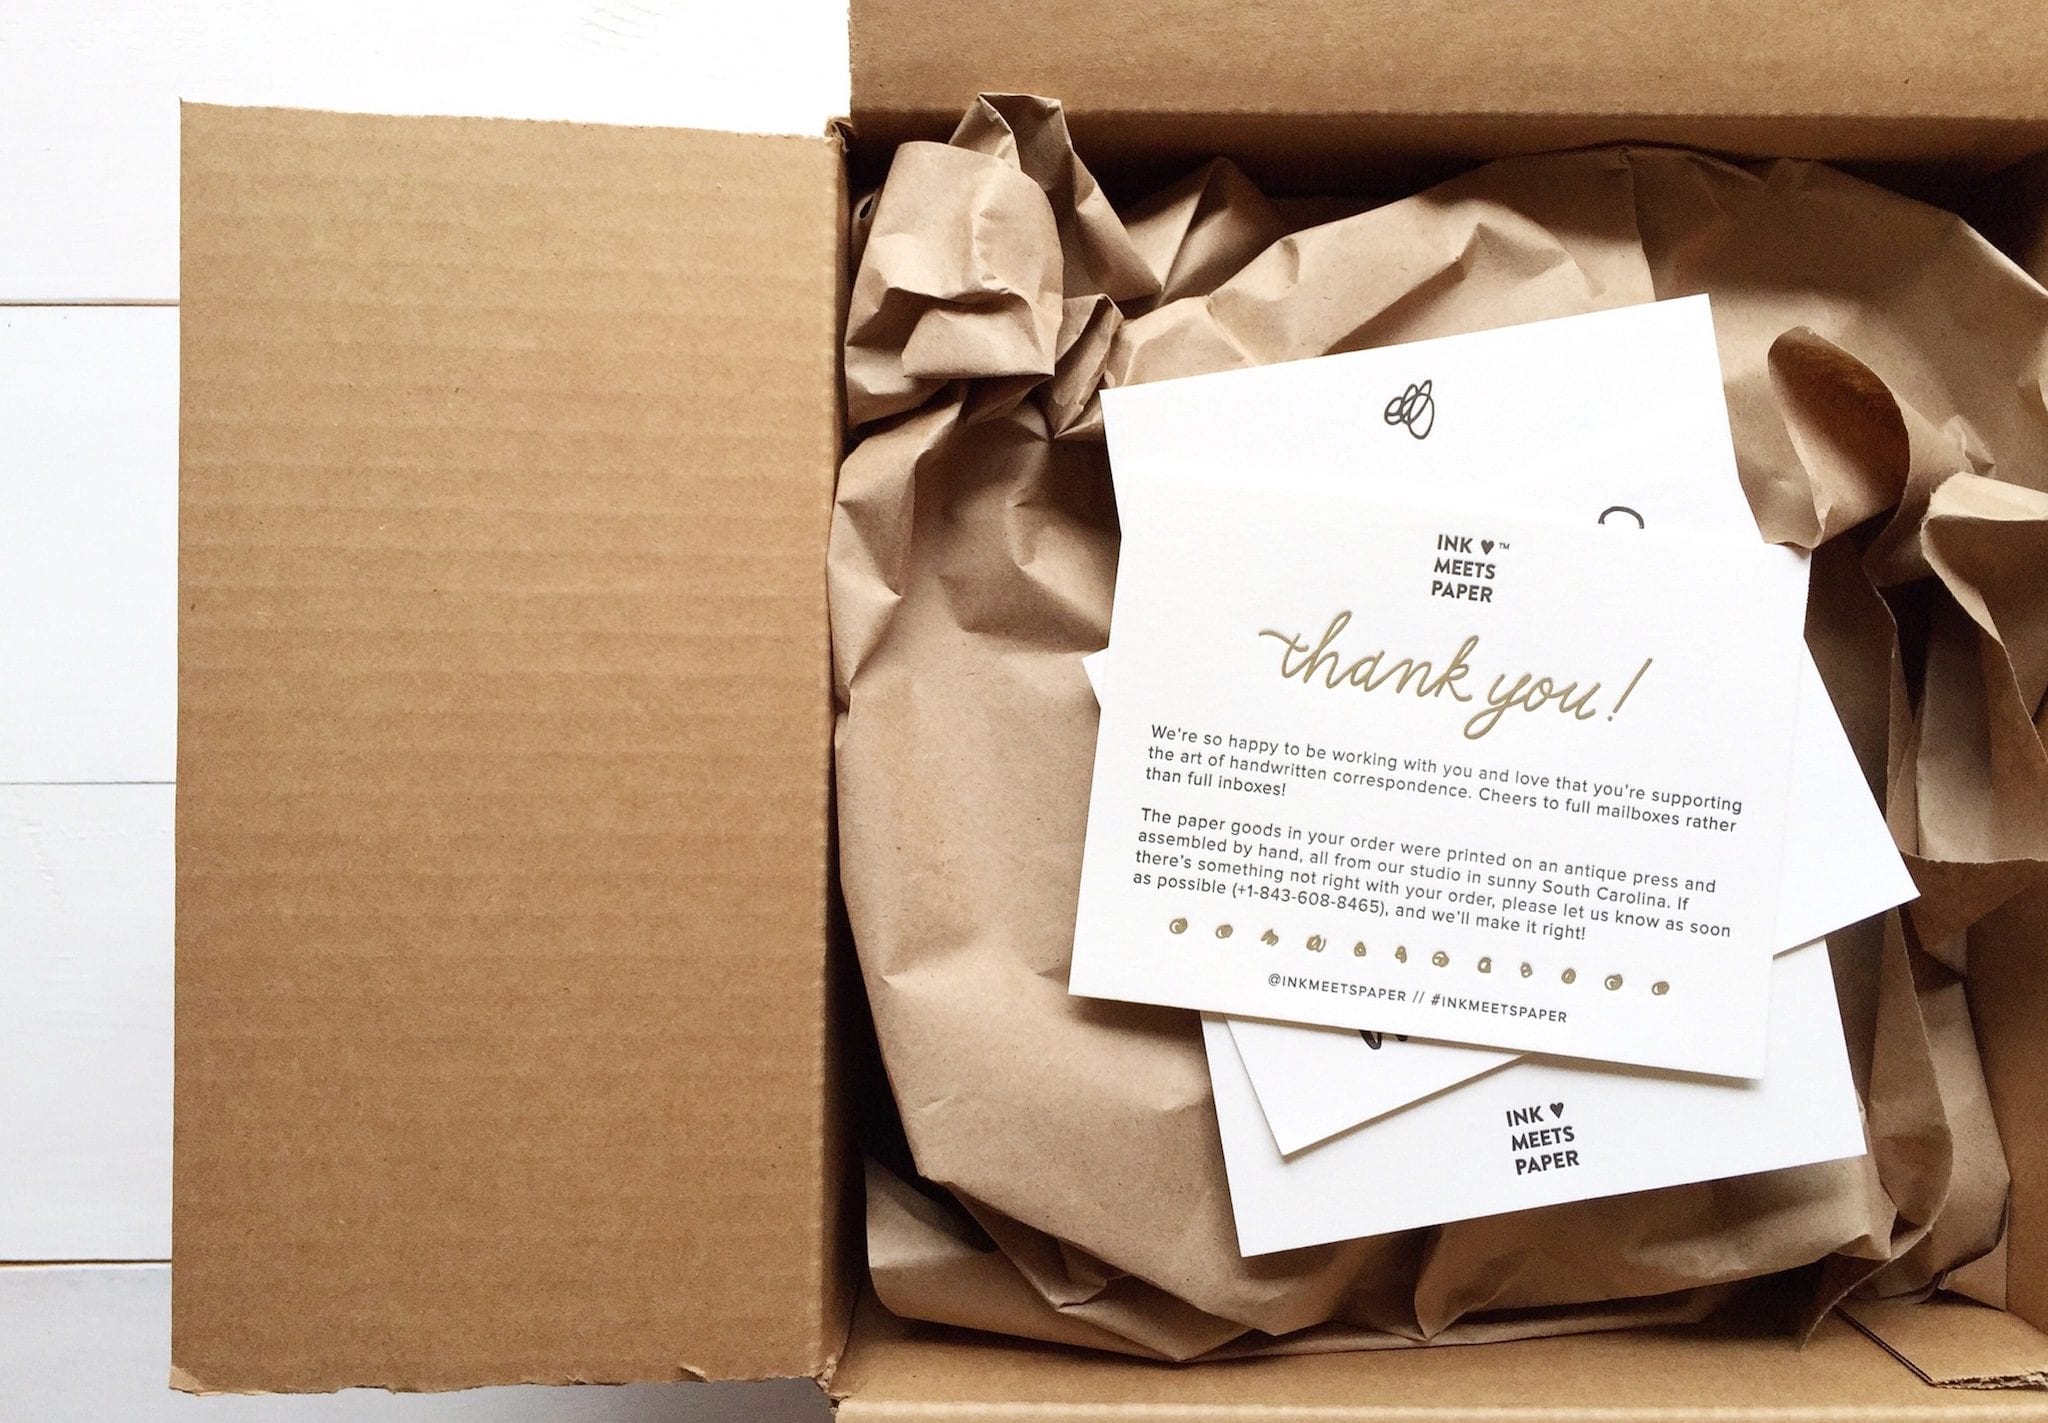 Open shipping box with brown paper stuffing and company printed collateral